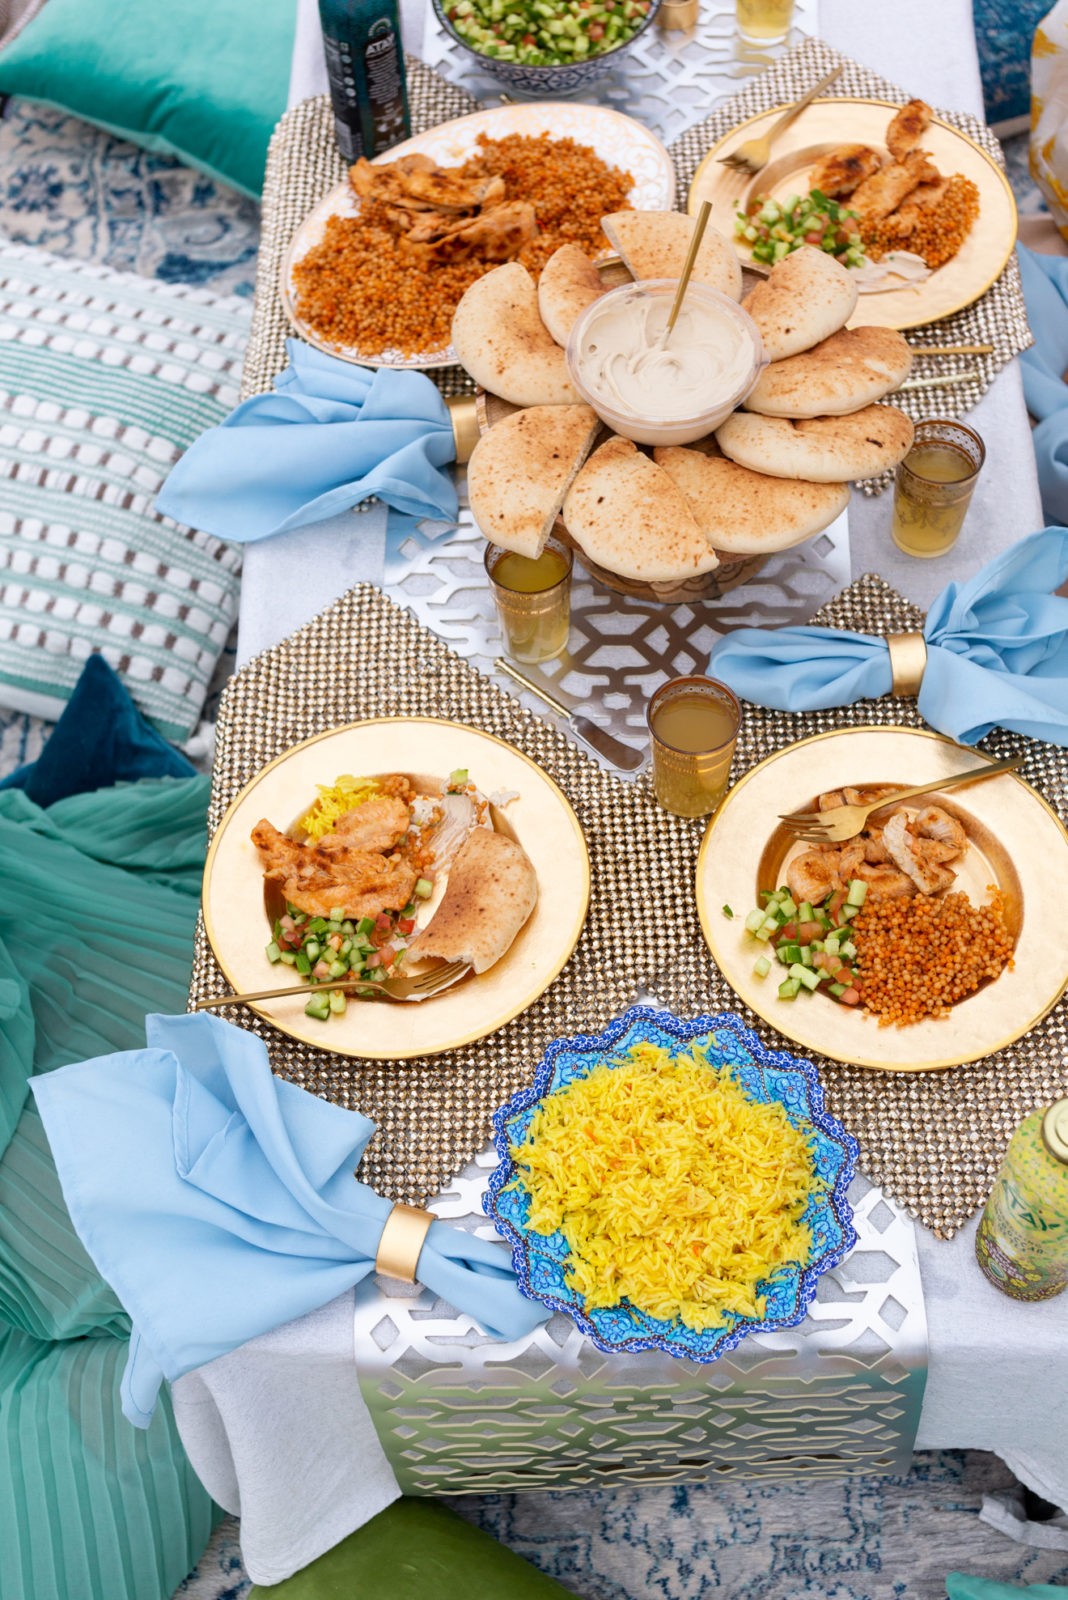 Moroccan Picnic with Atay Tea by popular California life and style blogger, Laura Lily: image of a moroccan picnic at the beach with gold beaded placemats, various moroccan foods, blue and green pillows, blue linen napkins, gold embellished moroccan cups, gold plate, gold silverware, and Atay Tea.